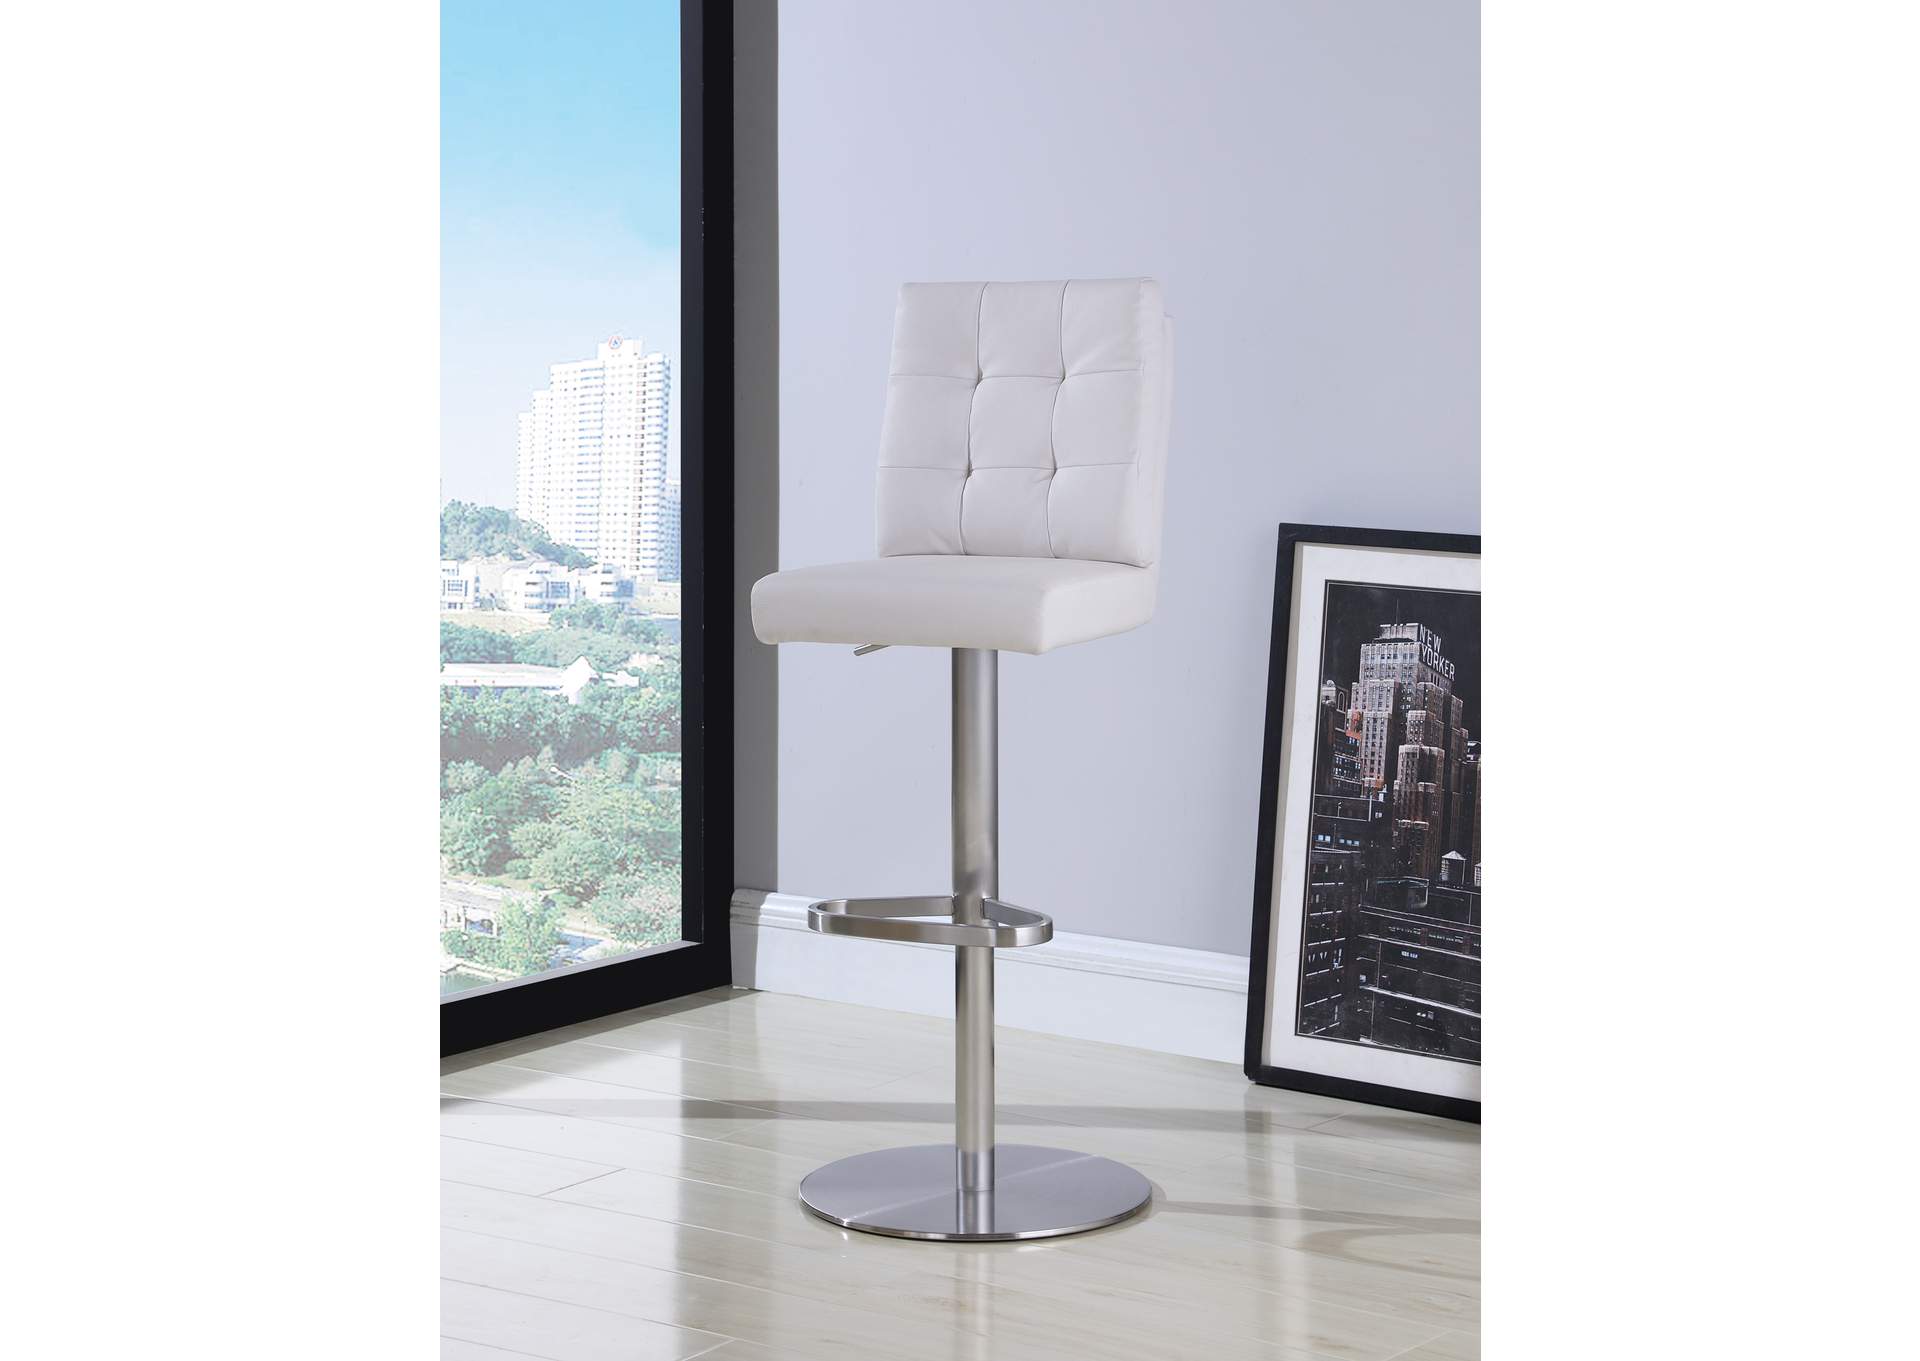 Brushed Stainless Steel Tufted Back Pneumatic-Adjustable Stool,Chintaly Imports